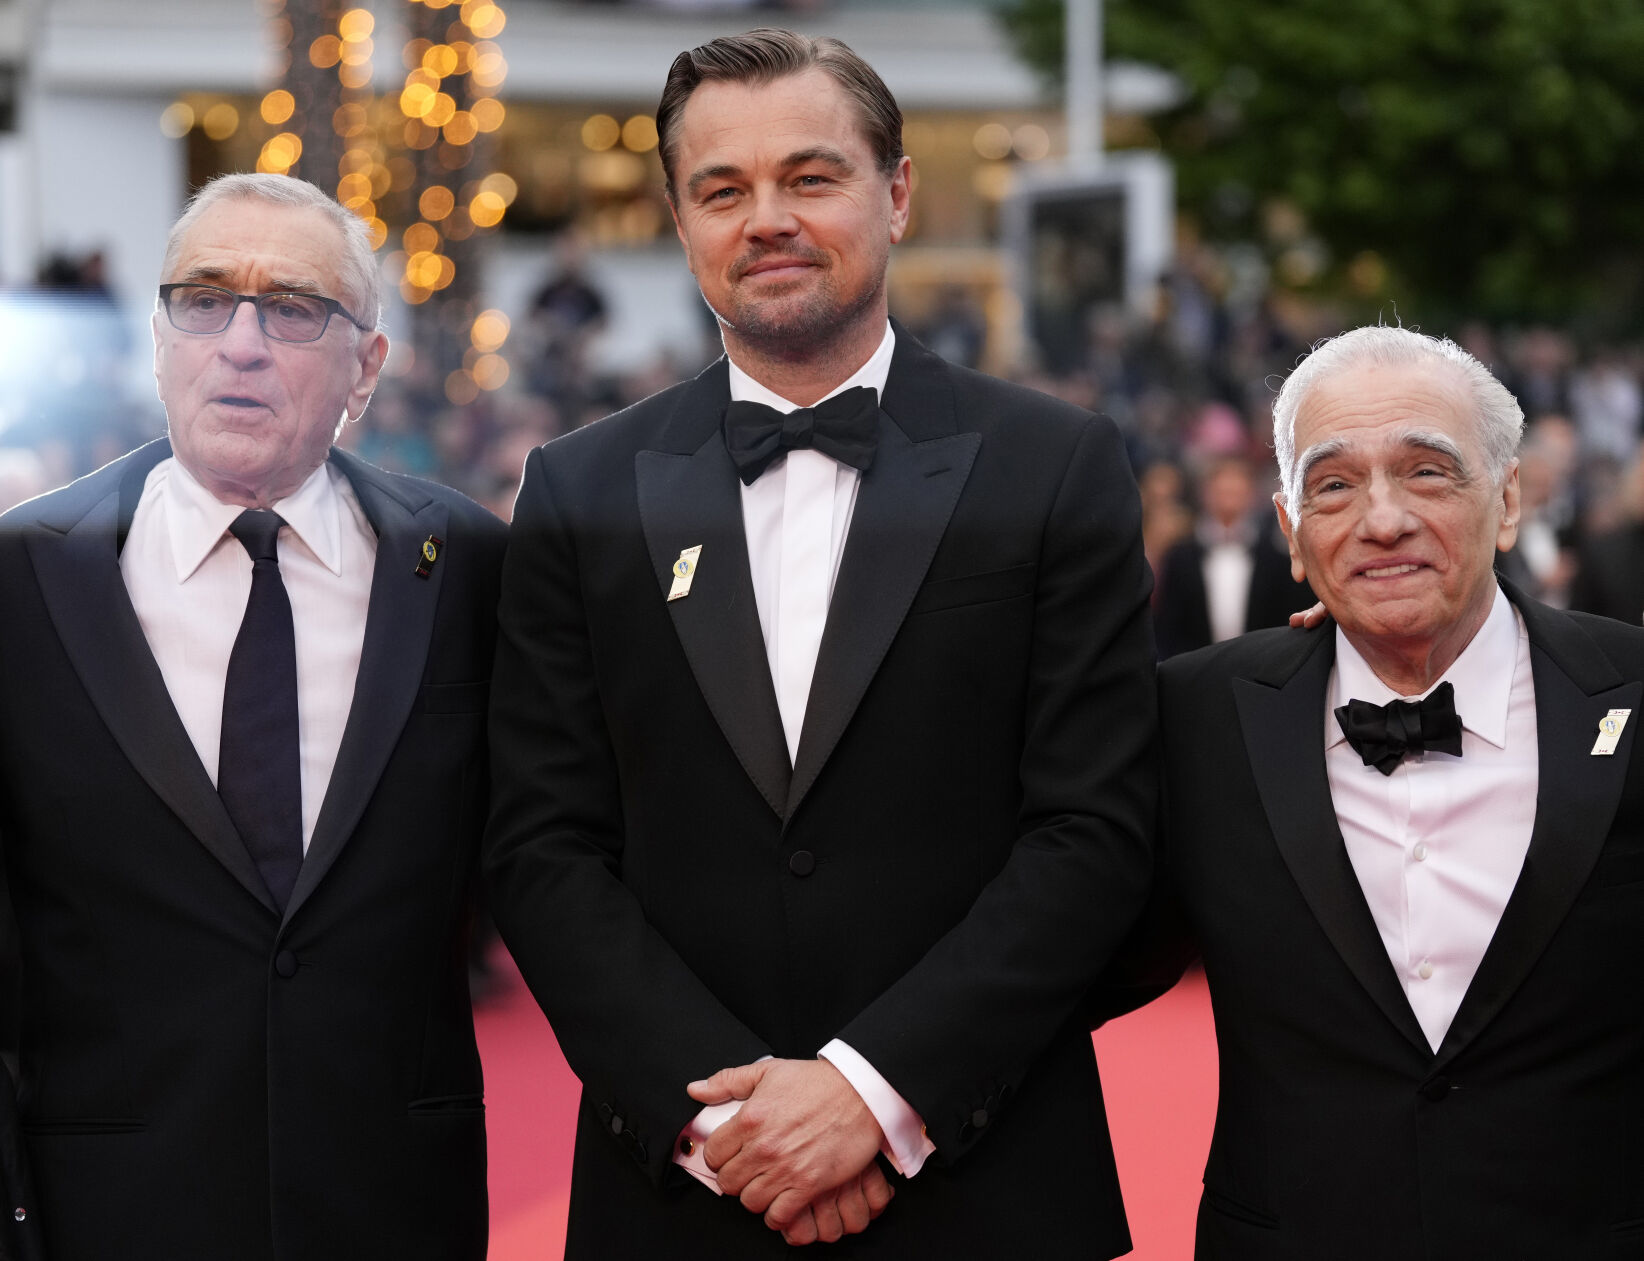 Robert De Niro, from left, Leonardo DiCaprio and director Martin Scorsese pose for photographers upon arrival at the premiere of the film 'Killers of the Flower Moon' at the 76th international film festival, Cannes, southern France, Saturday, May 20, 2023.